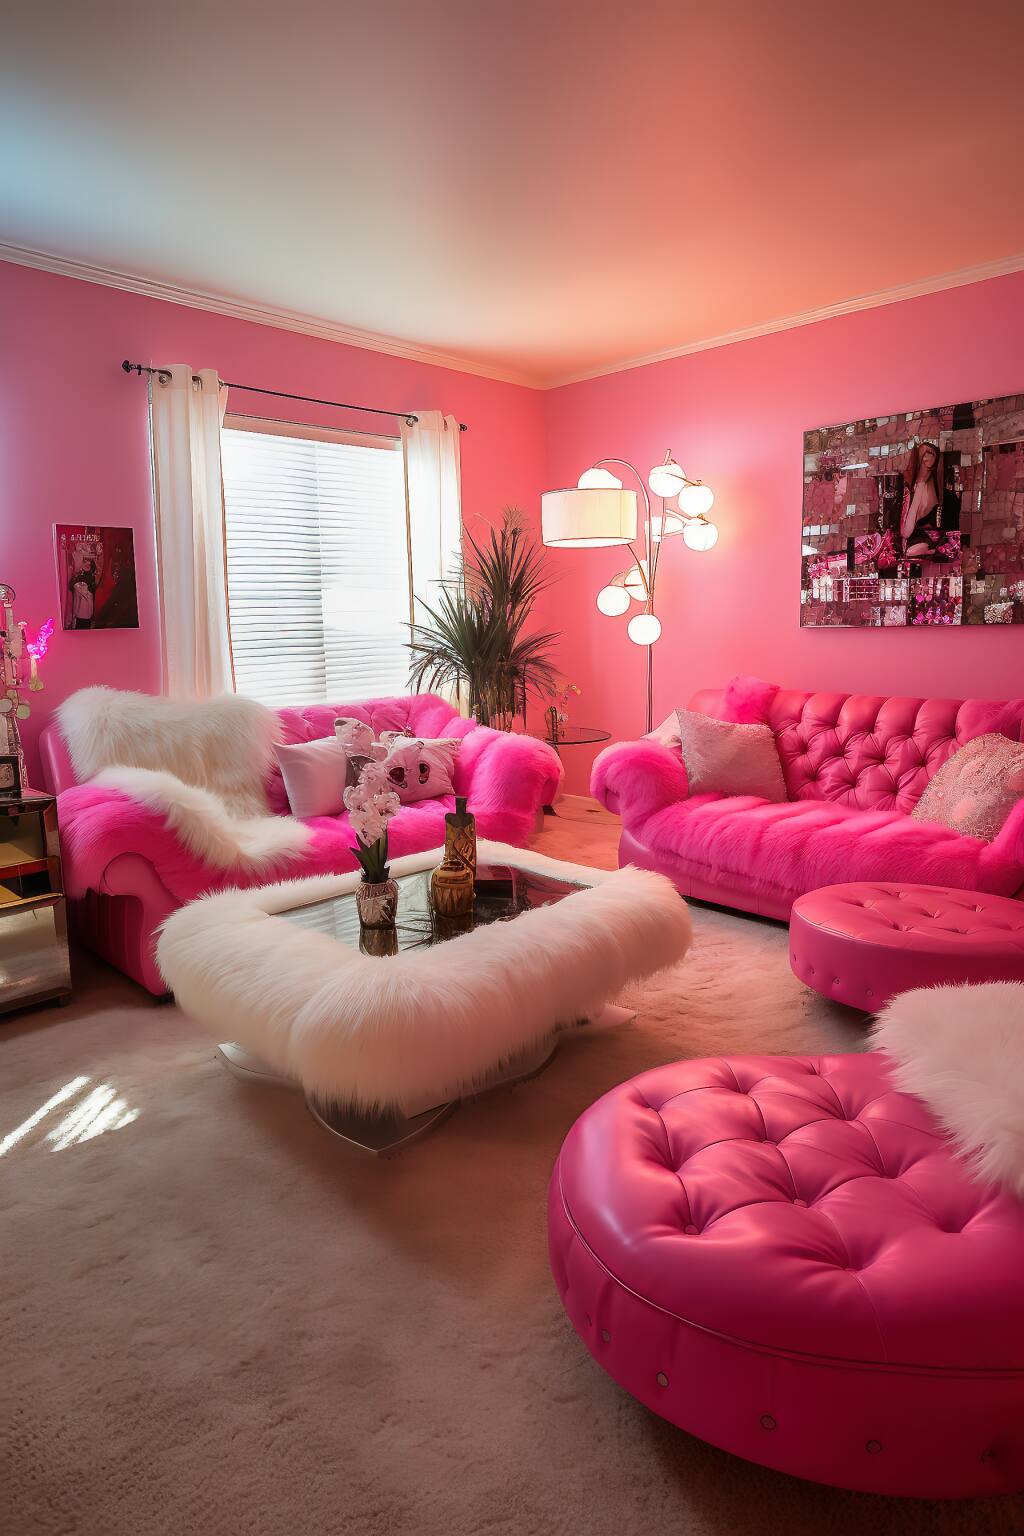 A Glamorous Living Room With Fuchsia Walls And Furniture, White Faux Fur Accents, And A Modern Glass Coffee Table Under A Warm, Ambient Glow.